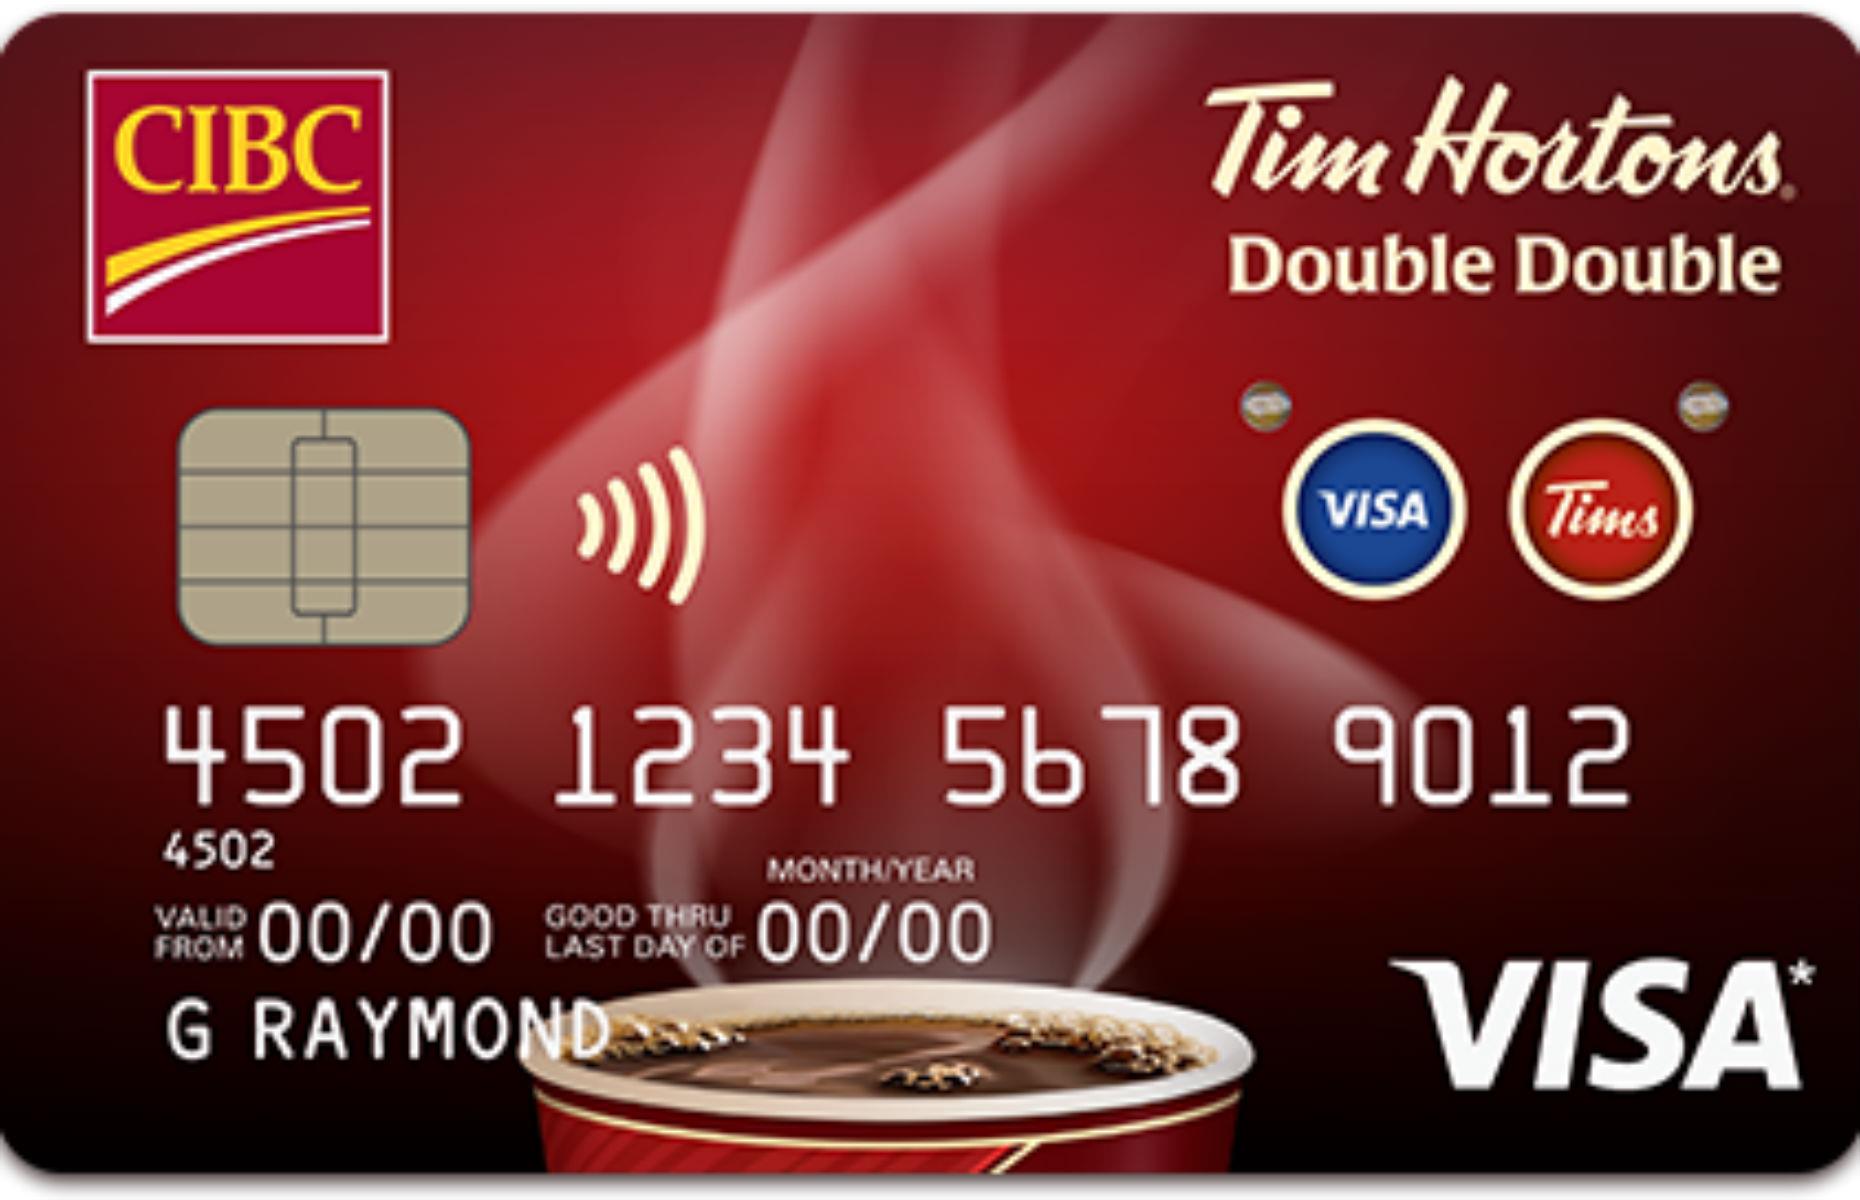 Another kind of Tim Card